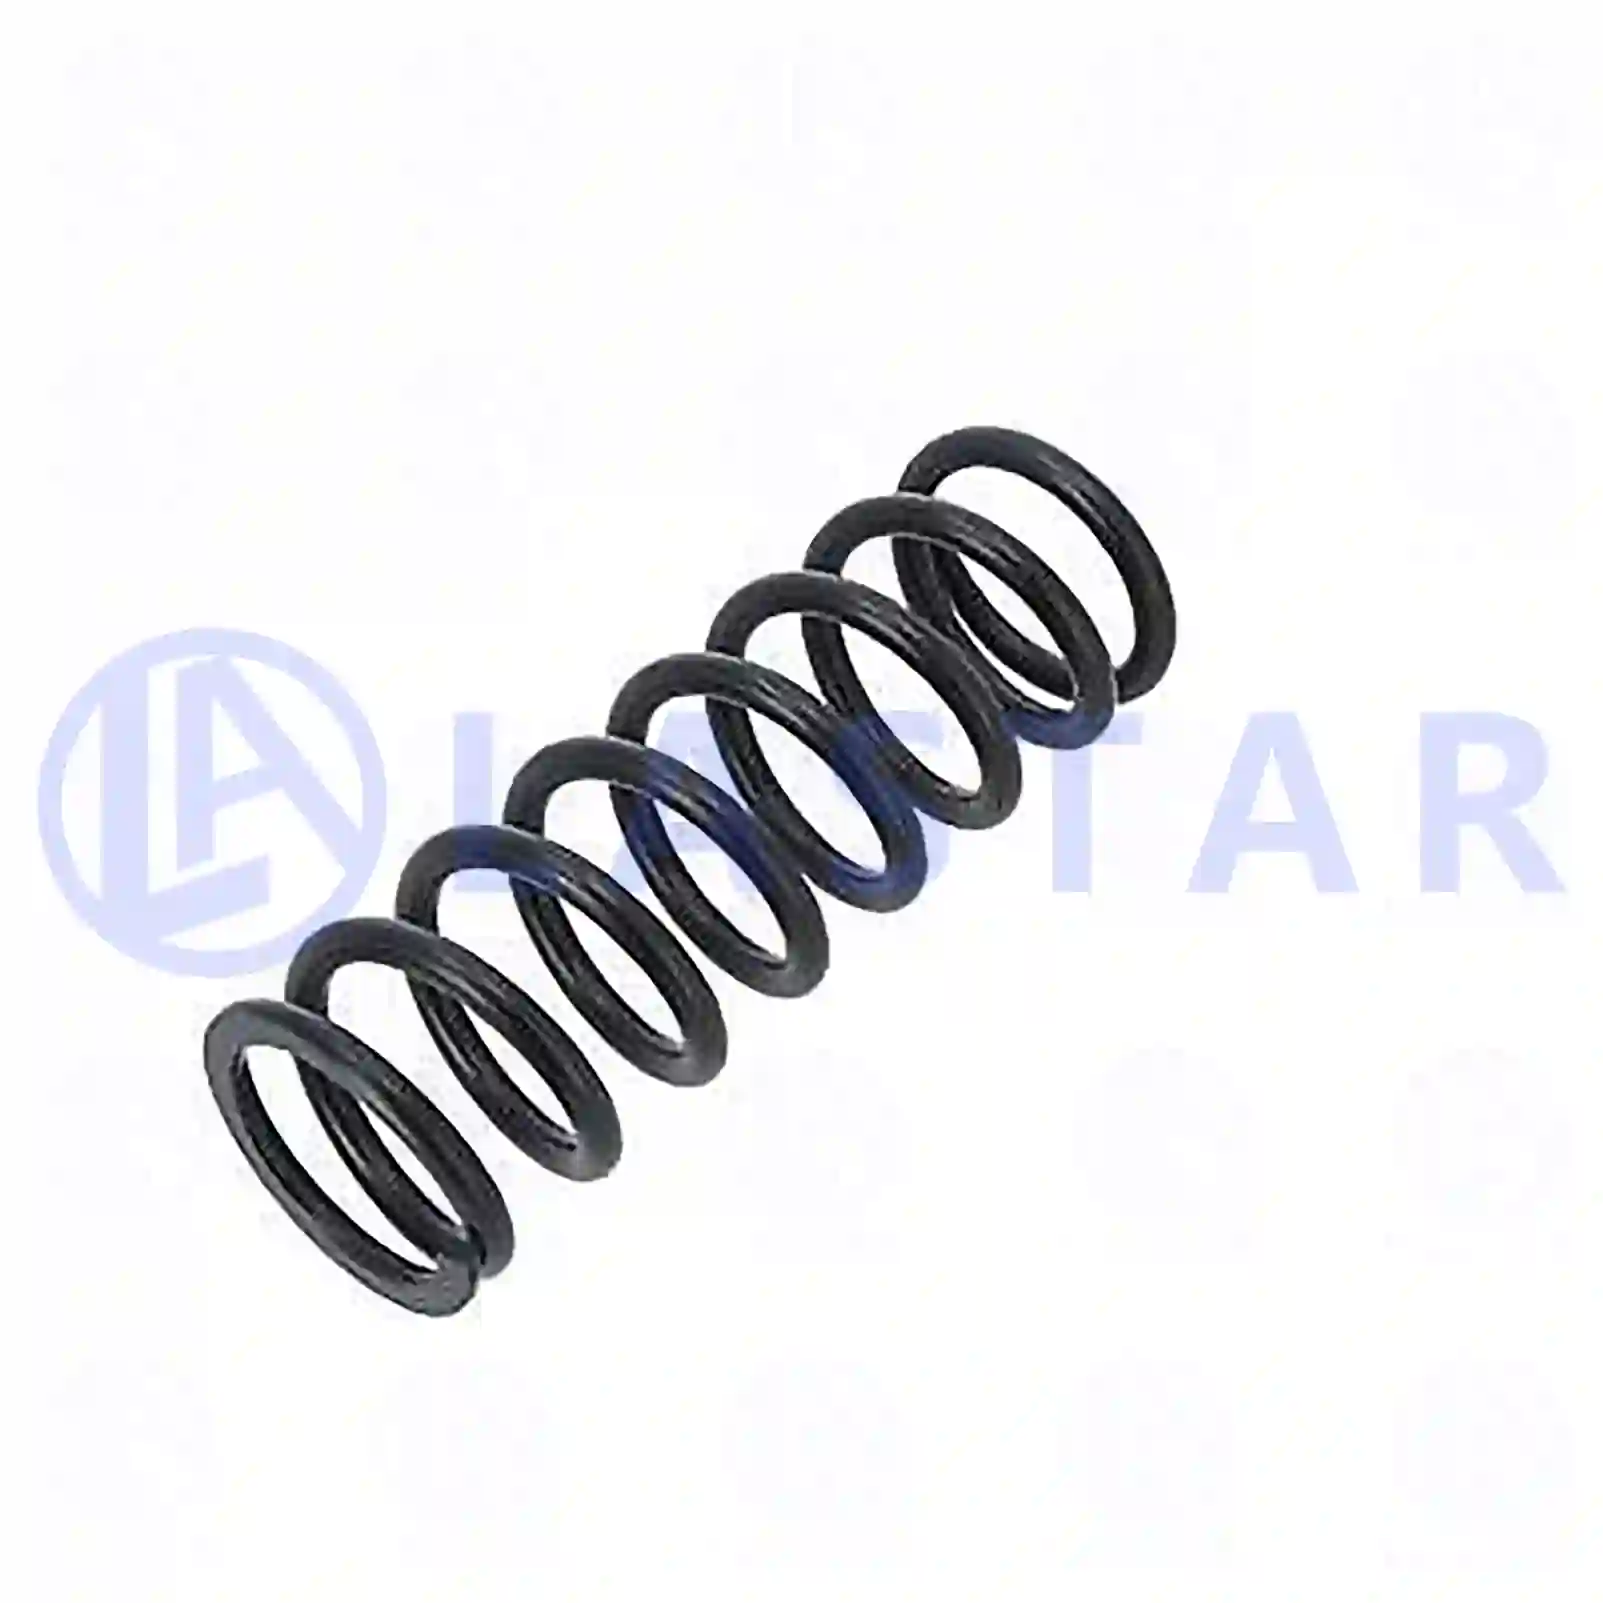 Spring, cabin shock absorber, 77735776, 7401079949, 1079949, ZG41667-0008, ||  77735776 Lastar Spare Part | Truck Spare Parts, Auotomotive Spare Parts Spring, cabin shock absorber, 77735776, 7401079949, 1079949, ZG41667-0008, ||  77735776 Lastar Spare Part | Truck Spare Parts, Auotomotive Spare Parts